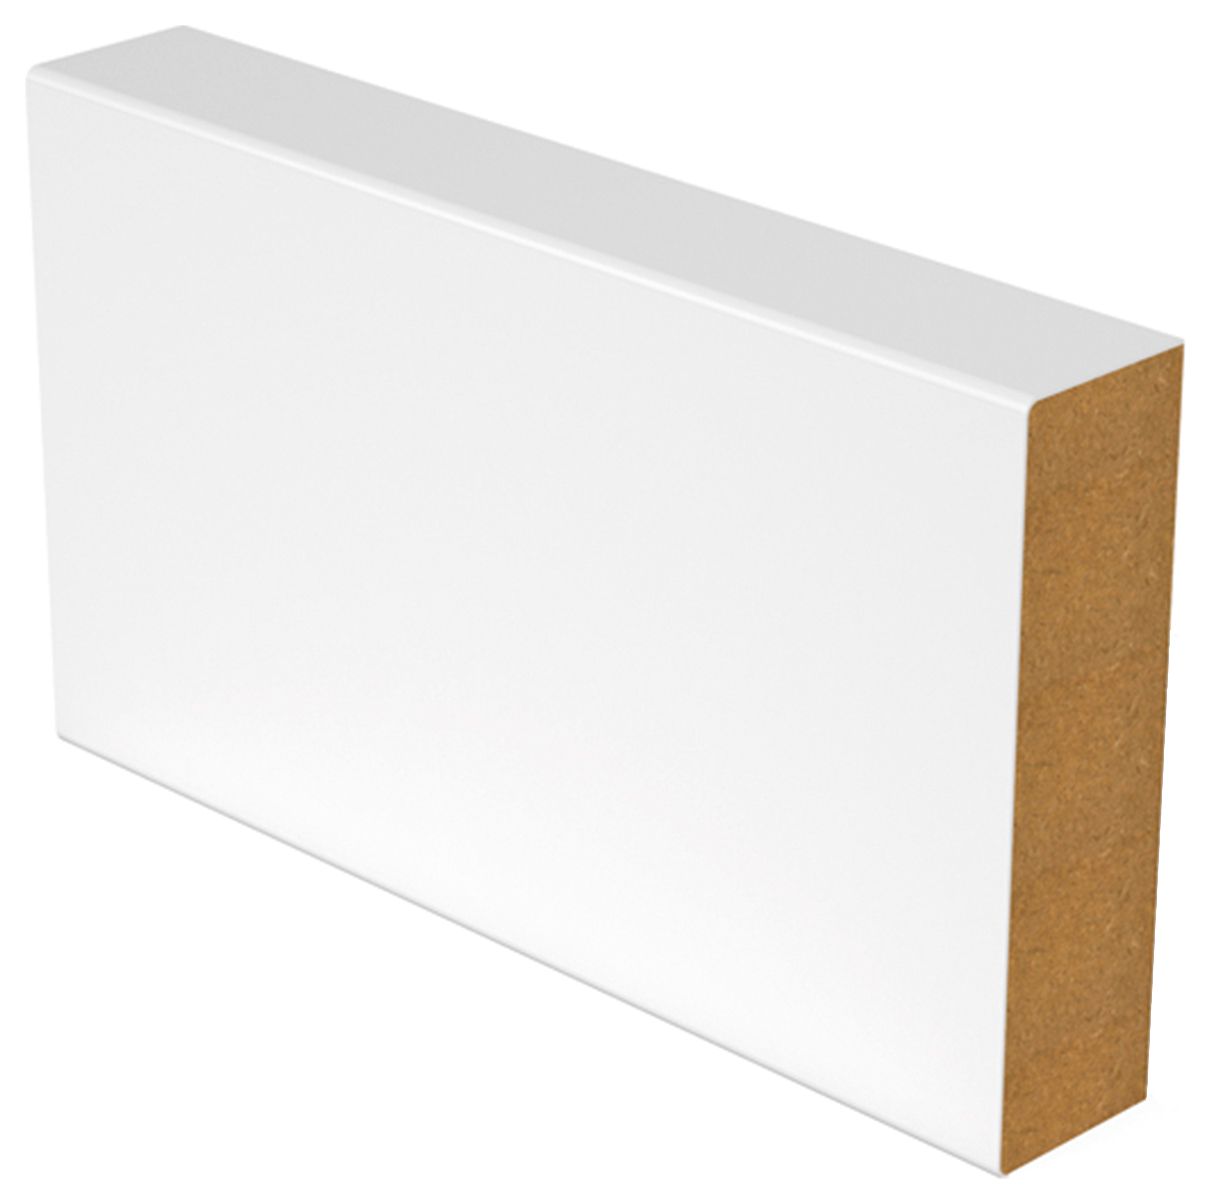 Image of Wickes Square Edge Skirting - 18 x 94 x 2400mm